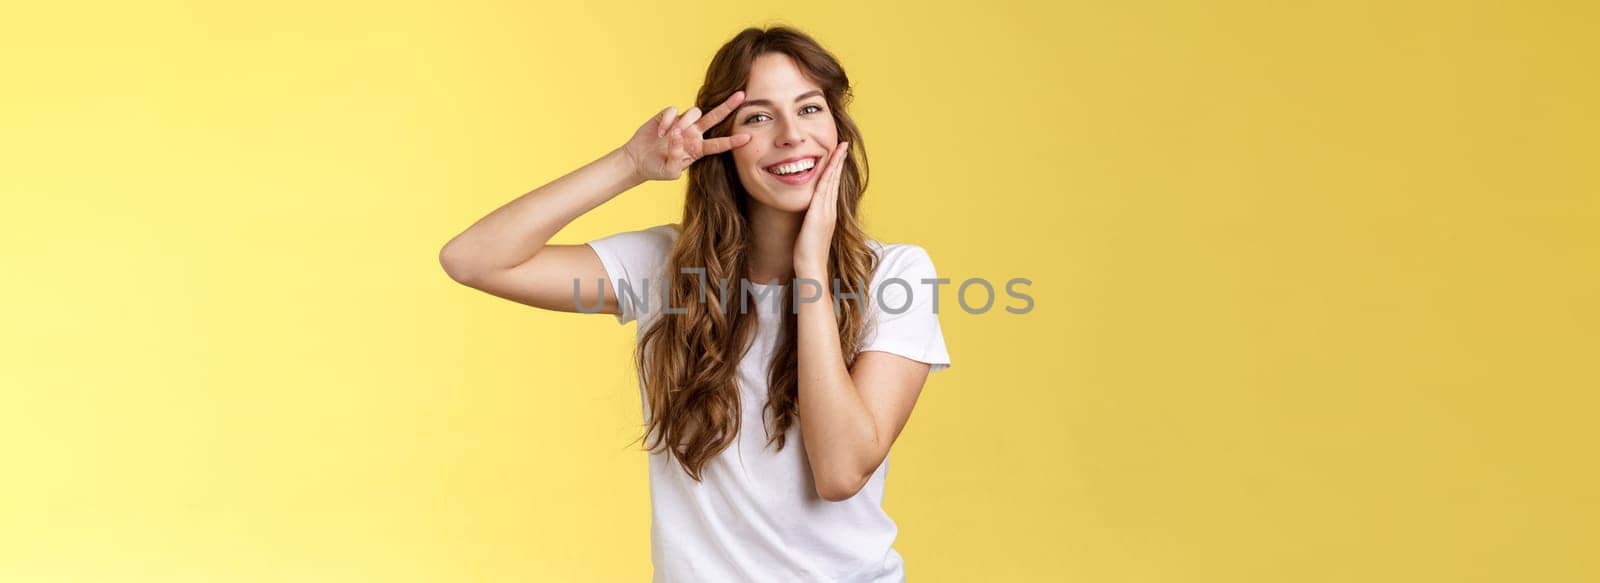 Cheerful positive lovely girlfriend curly hairstyle touch cheek blushing modest cute showing victory peace sign near eye optimistic upbeat attitude having fun enjoying summer yellow background. Lifestyle.